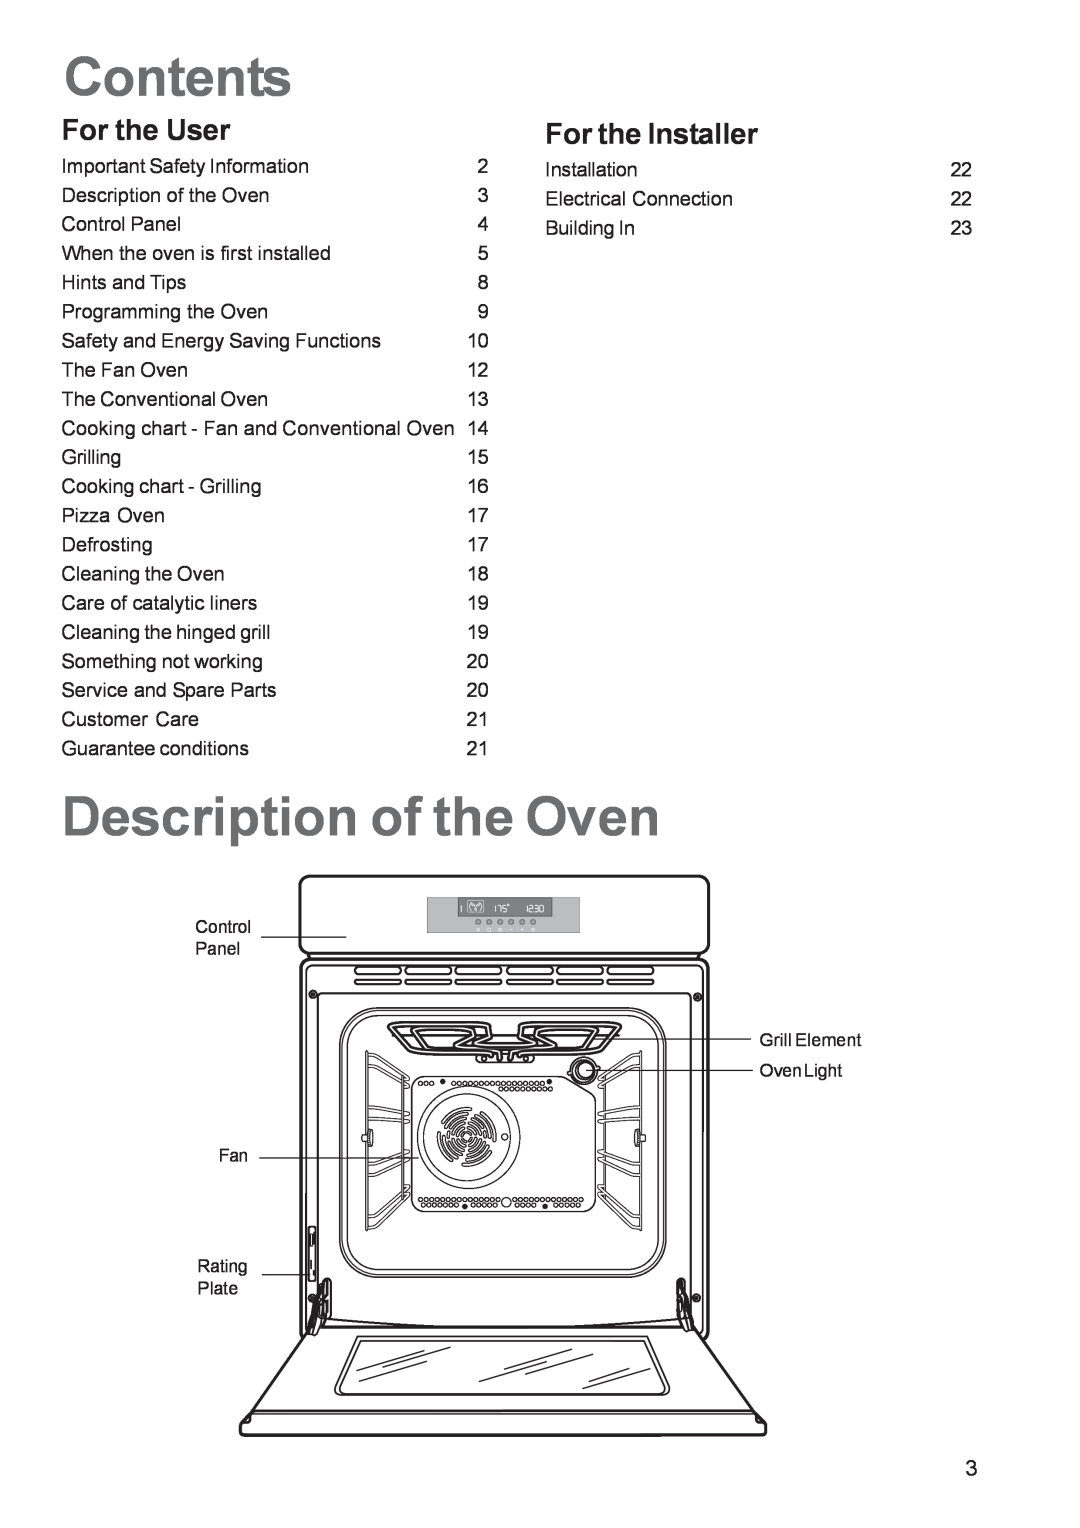 Zanussi ZOB 1060 manual Contents, Description of the Oven, For the User, For the Installer 